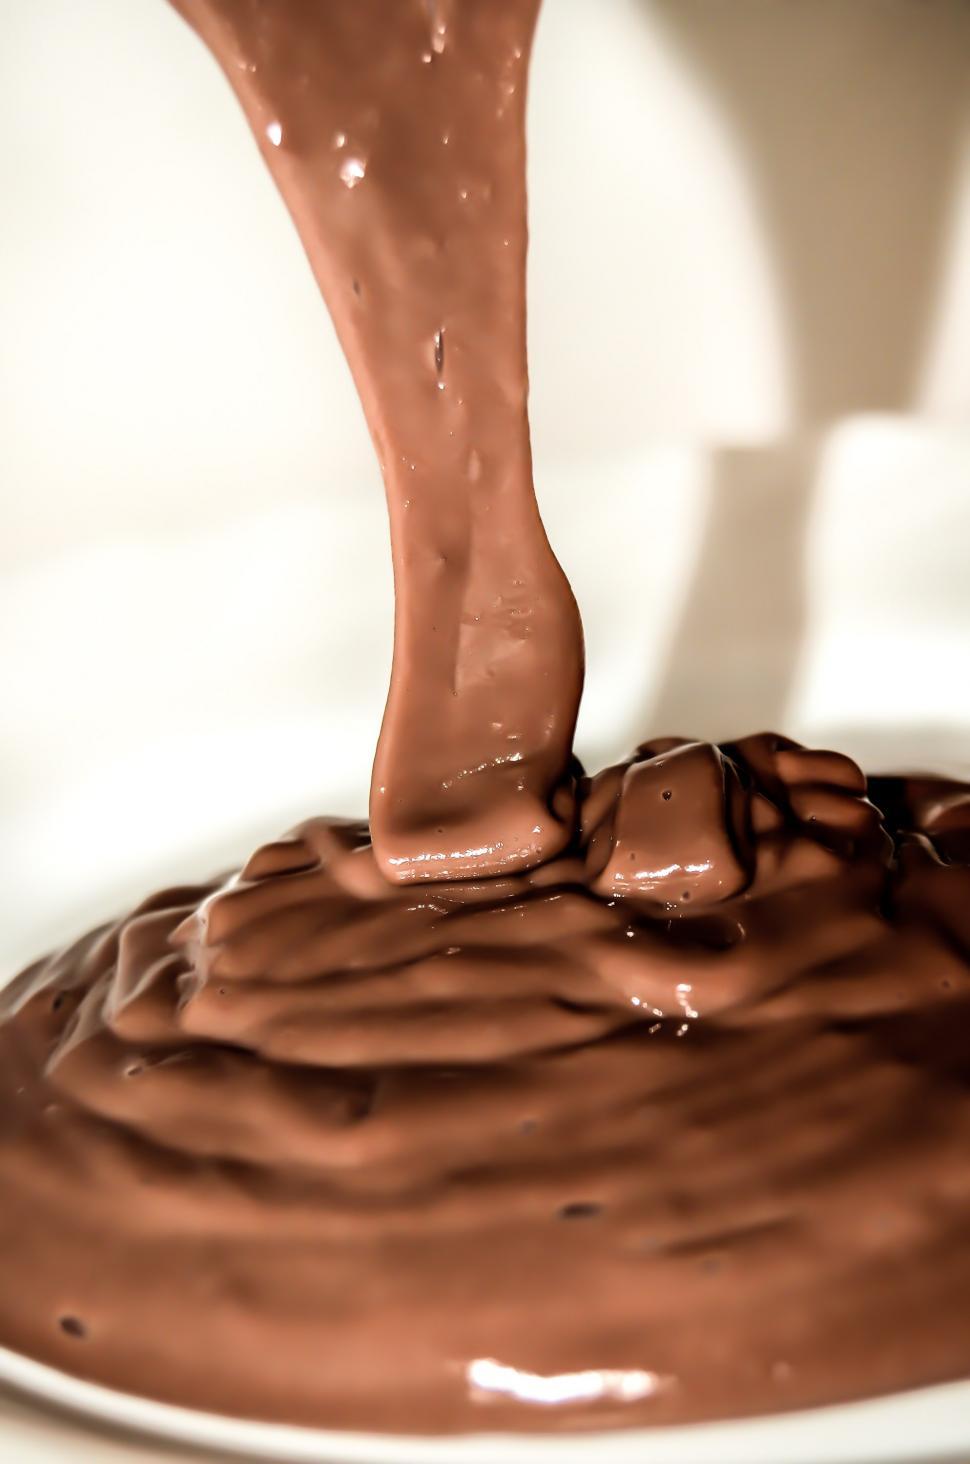 Free Image of Pouring Chocolate Sauce Into White Bowl 